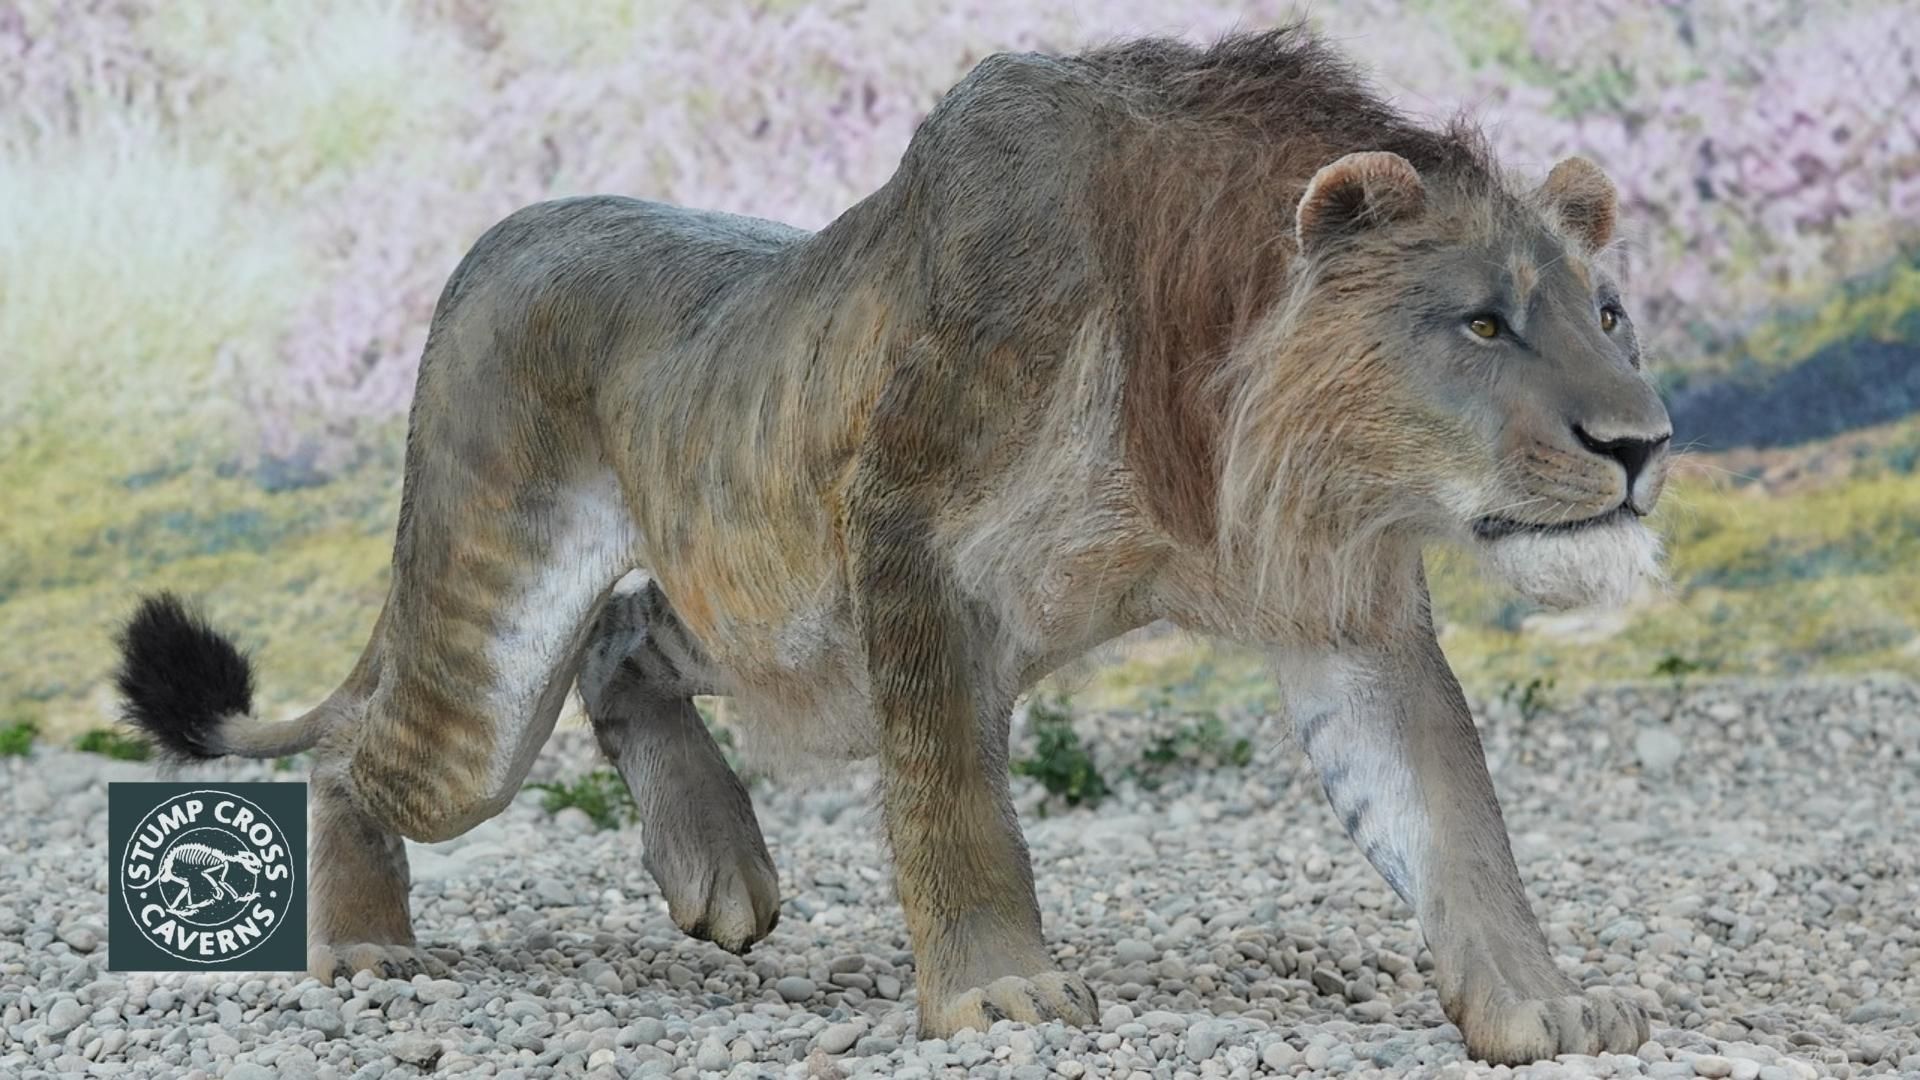 Britain isn't known for fierce creatures nowadays – but things used to be very different. Learn about one of our scariest Stone Age animals: the cave lion.